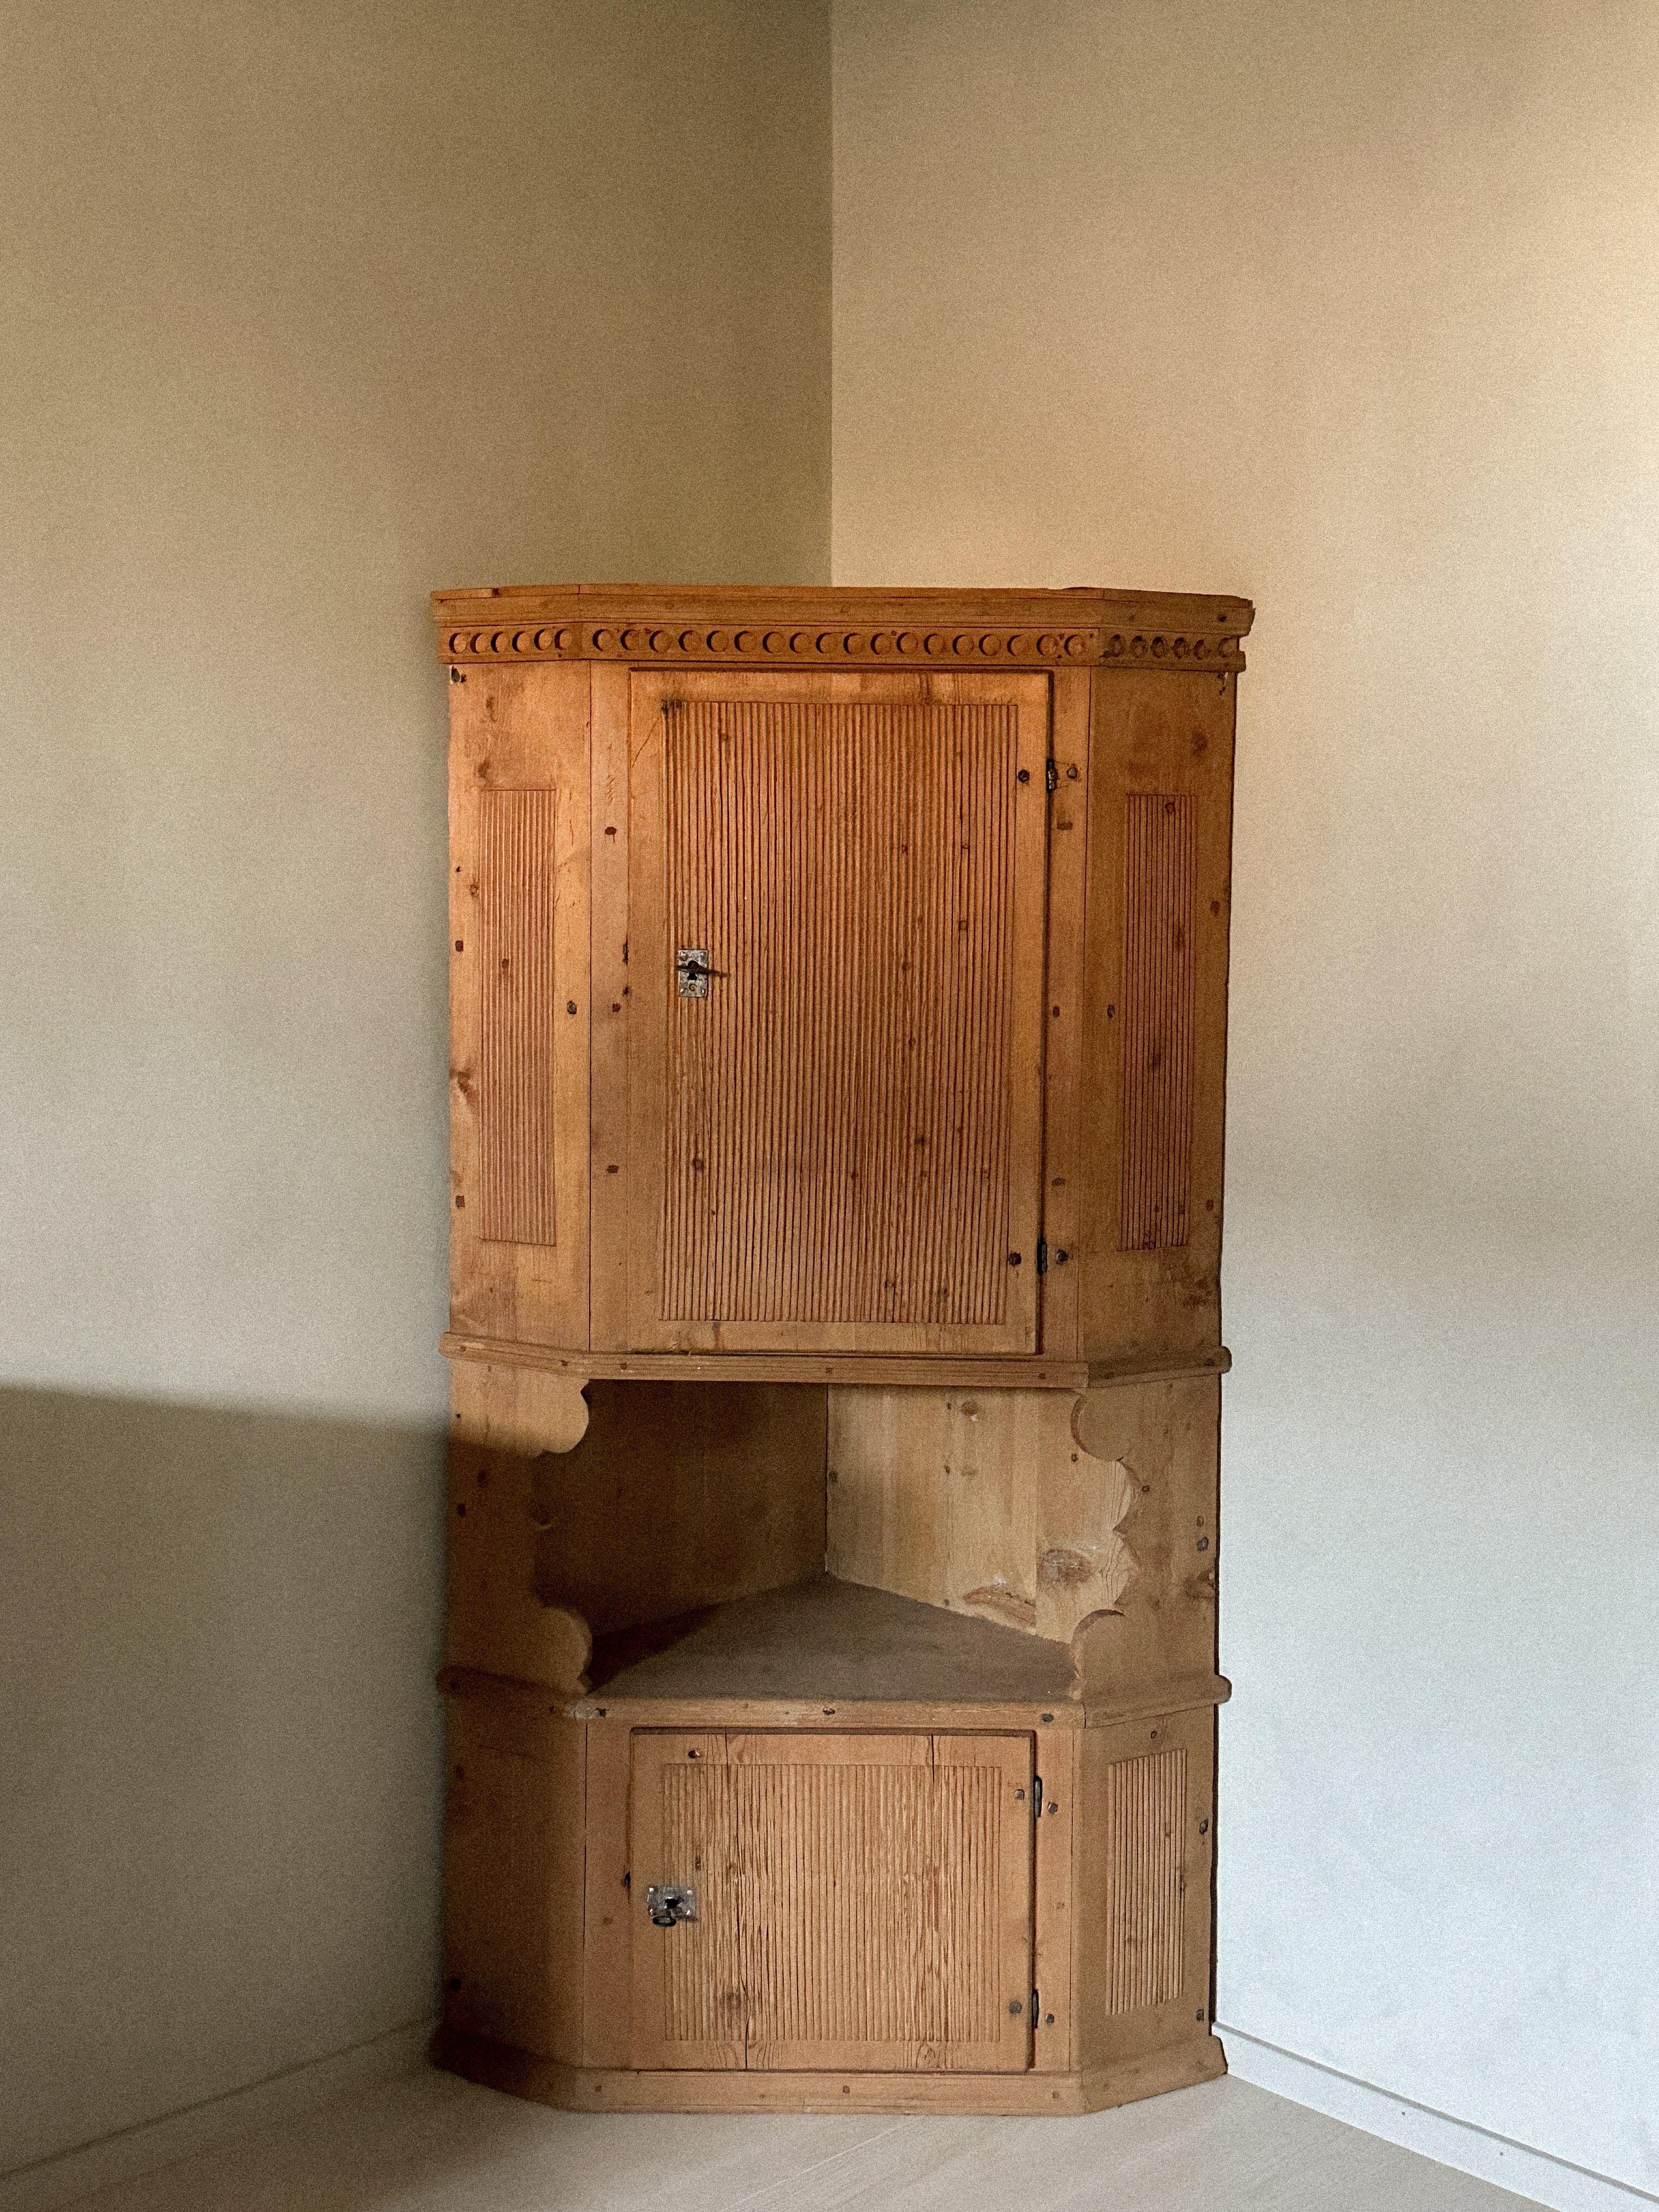 A Wonderful Primitive Corner Cupboard, Unknown designer, Scandinavia, c. 1800s. This case piece was meant  to hung on the wall in the dining room corner behind the man in the house. 